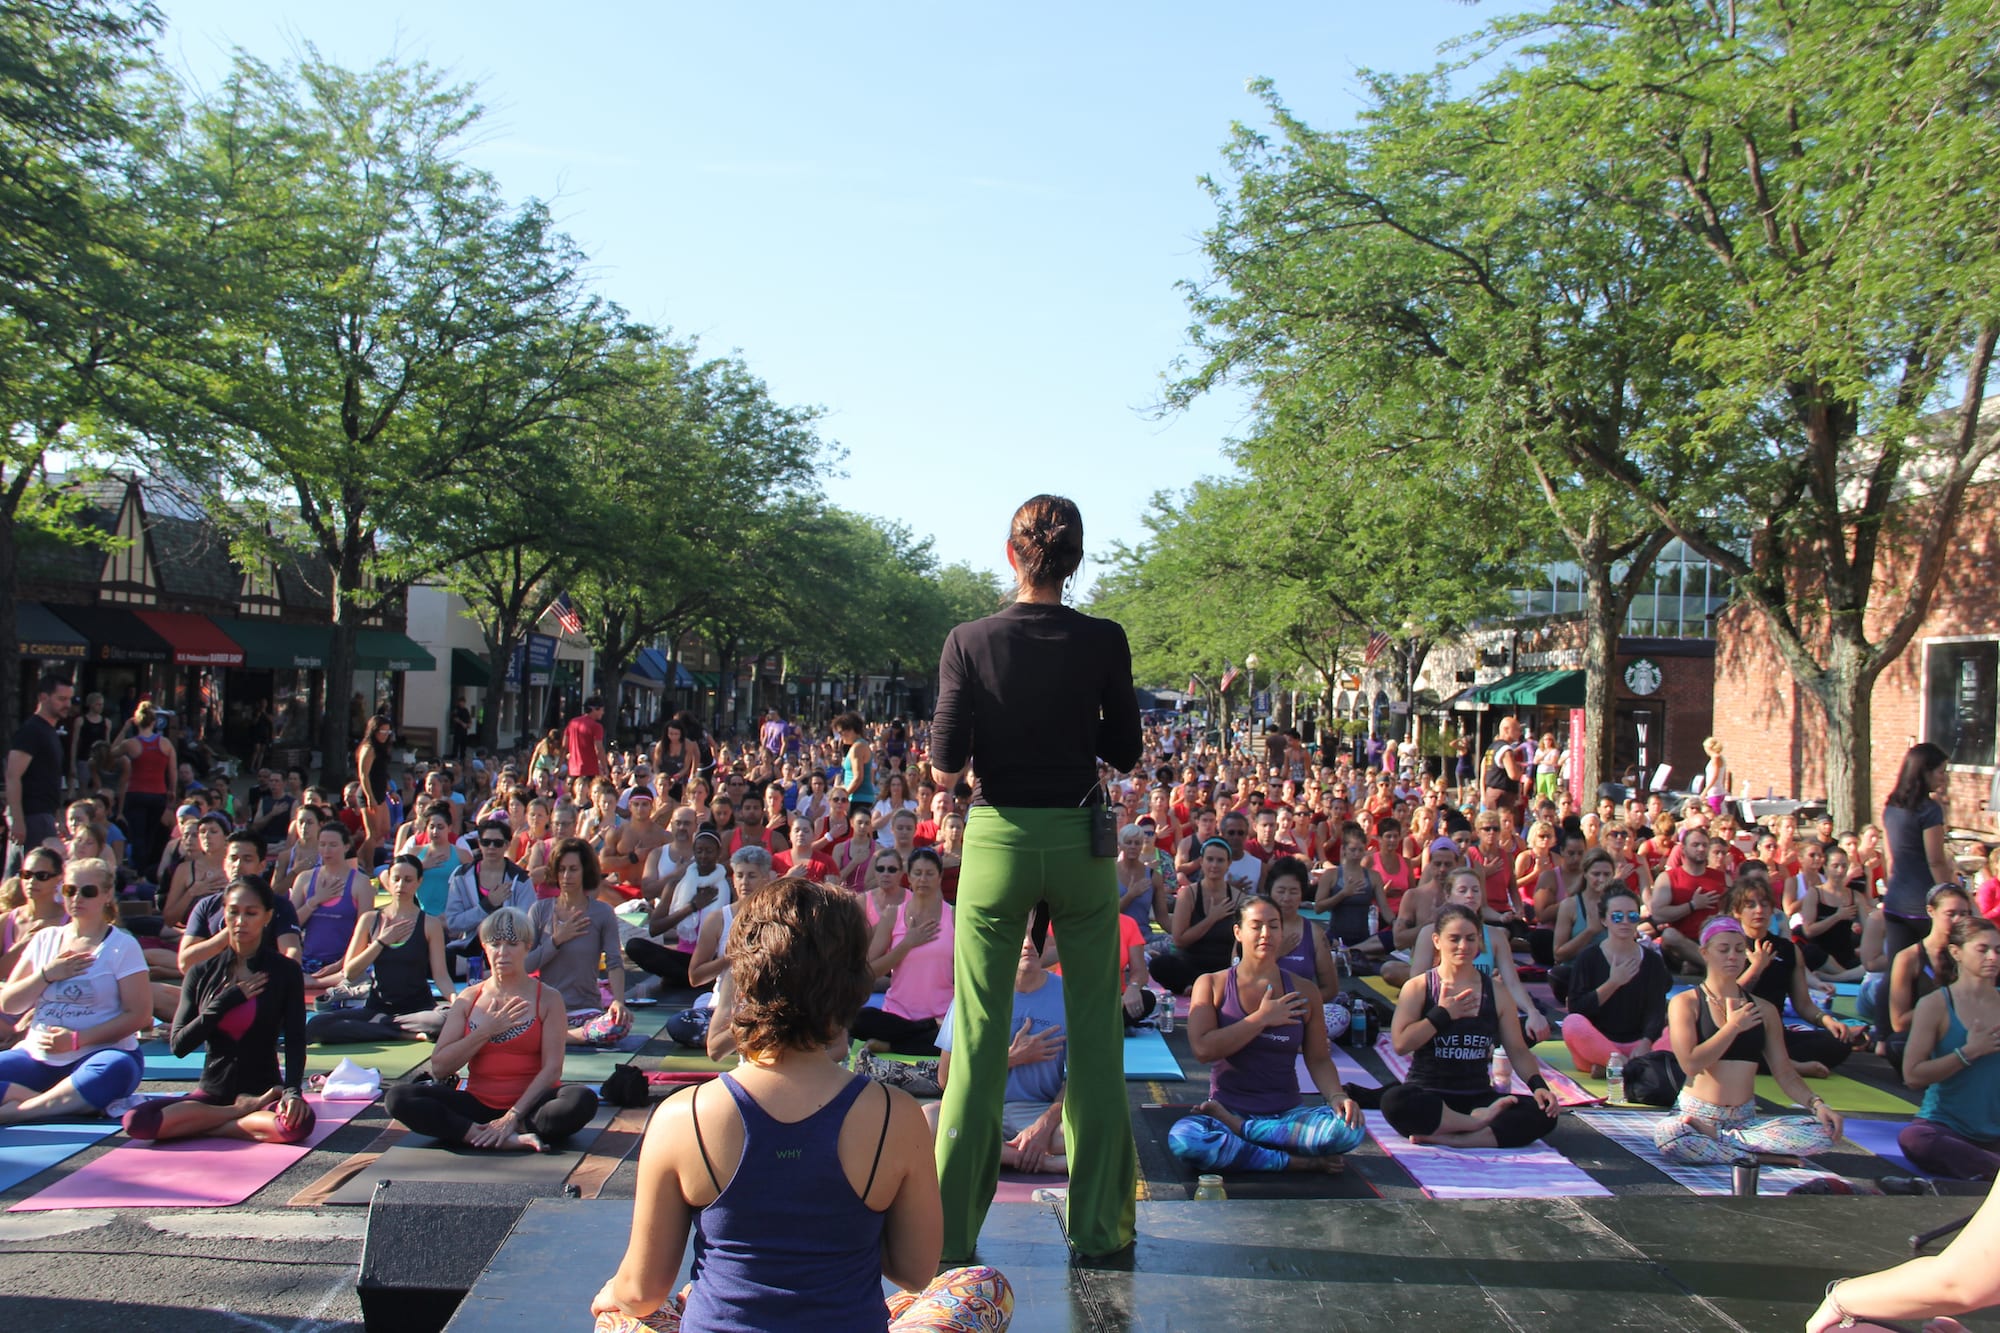 Om Street 2015, presented by West Hartford Yoga on LaSalle Road, July 25, 2015. Barbara Ruzansky surrounded by fellow instructors and participants. Photo by Amy Melvin